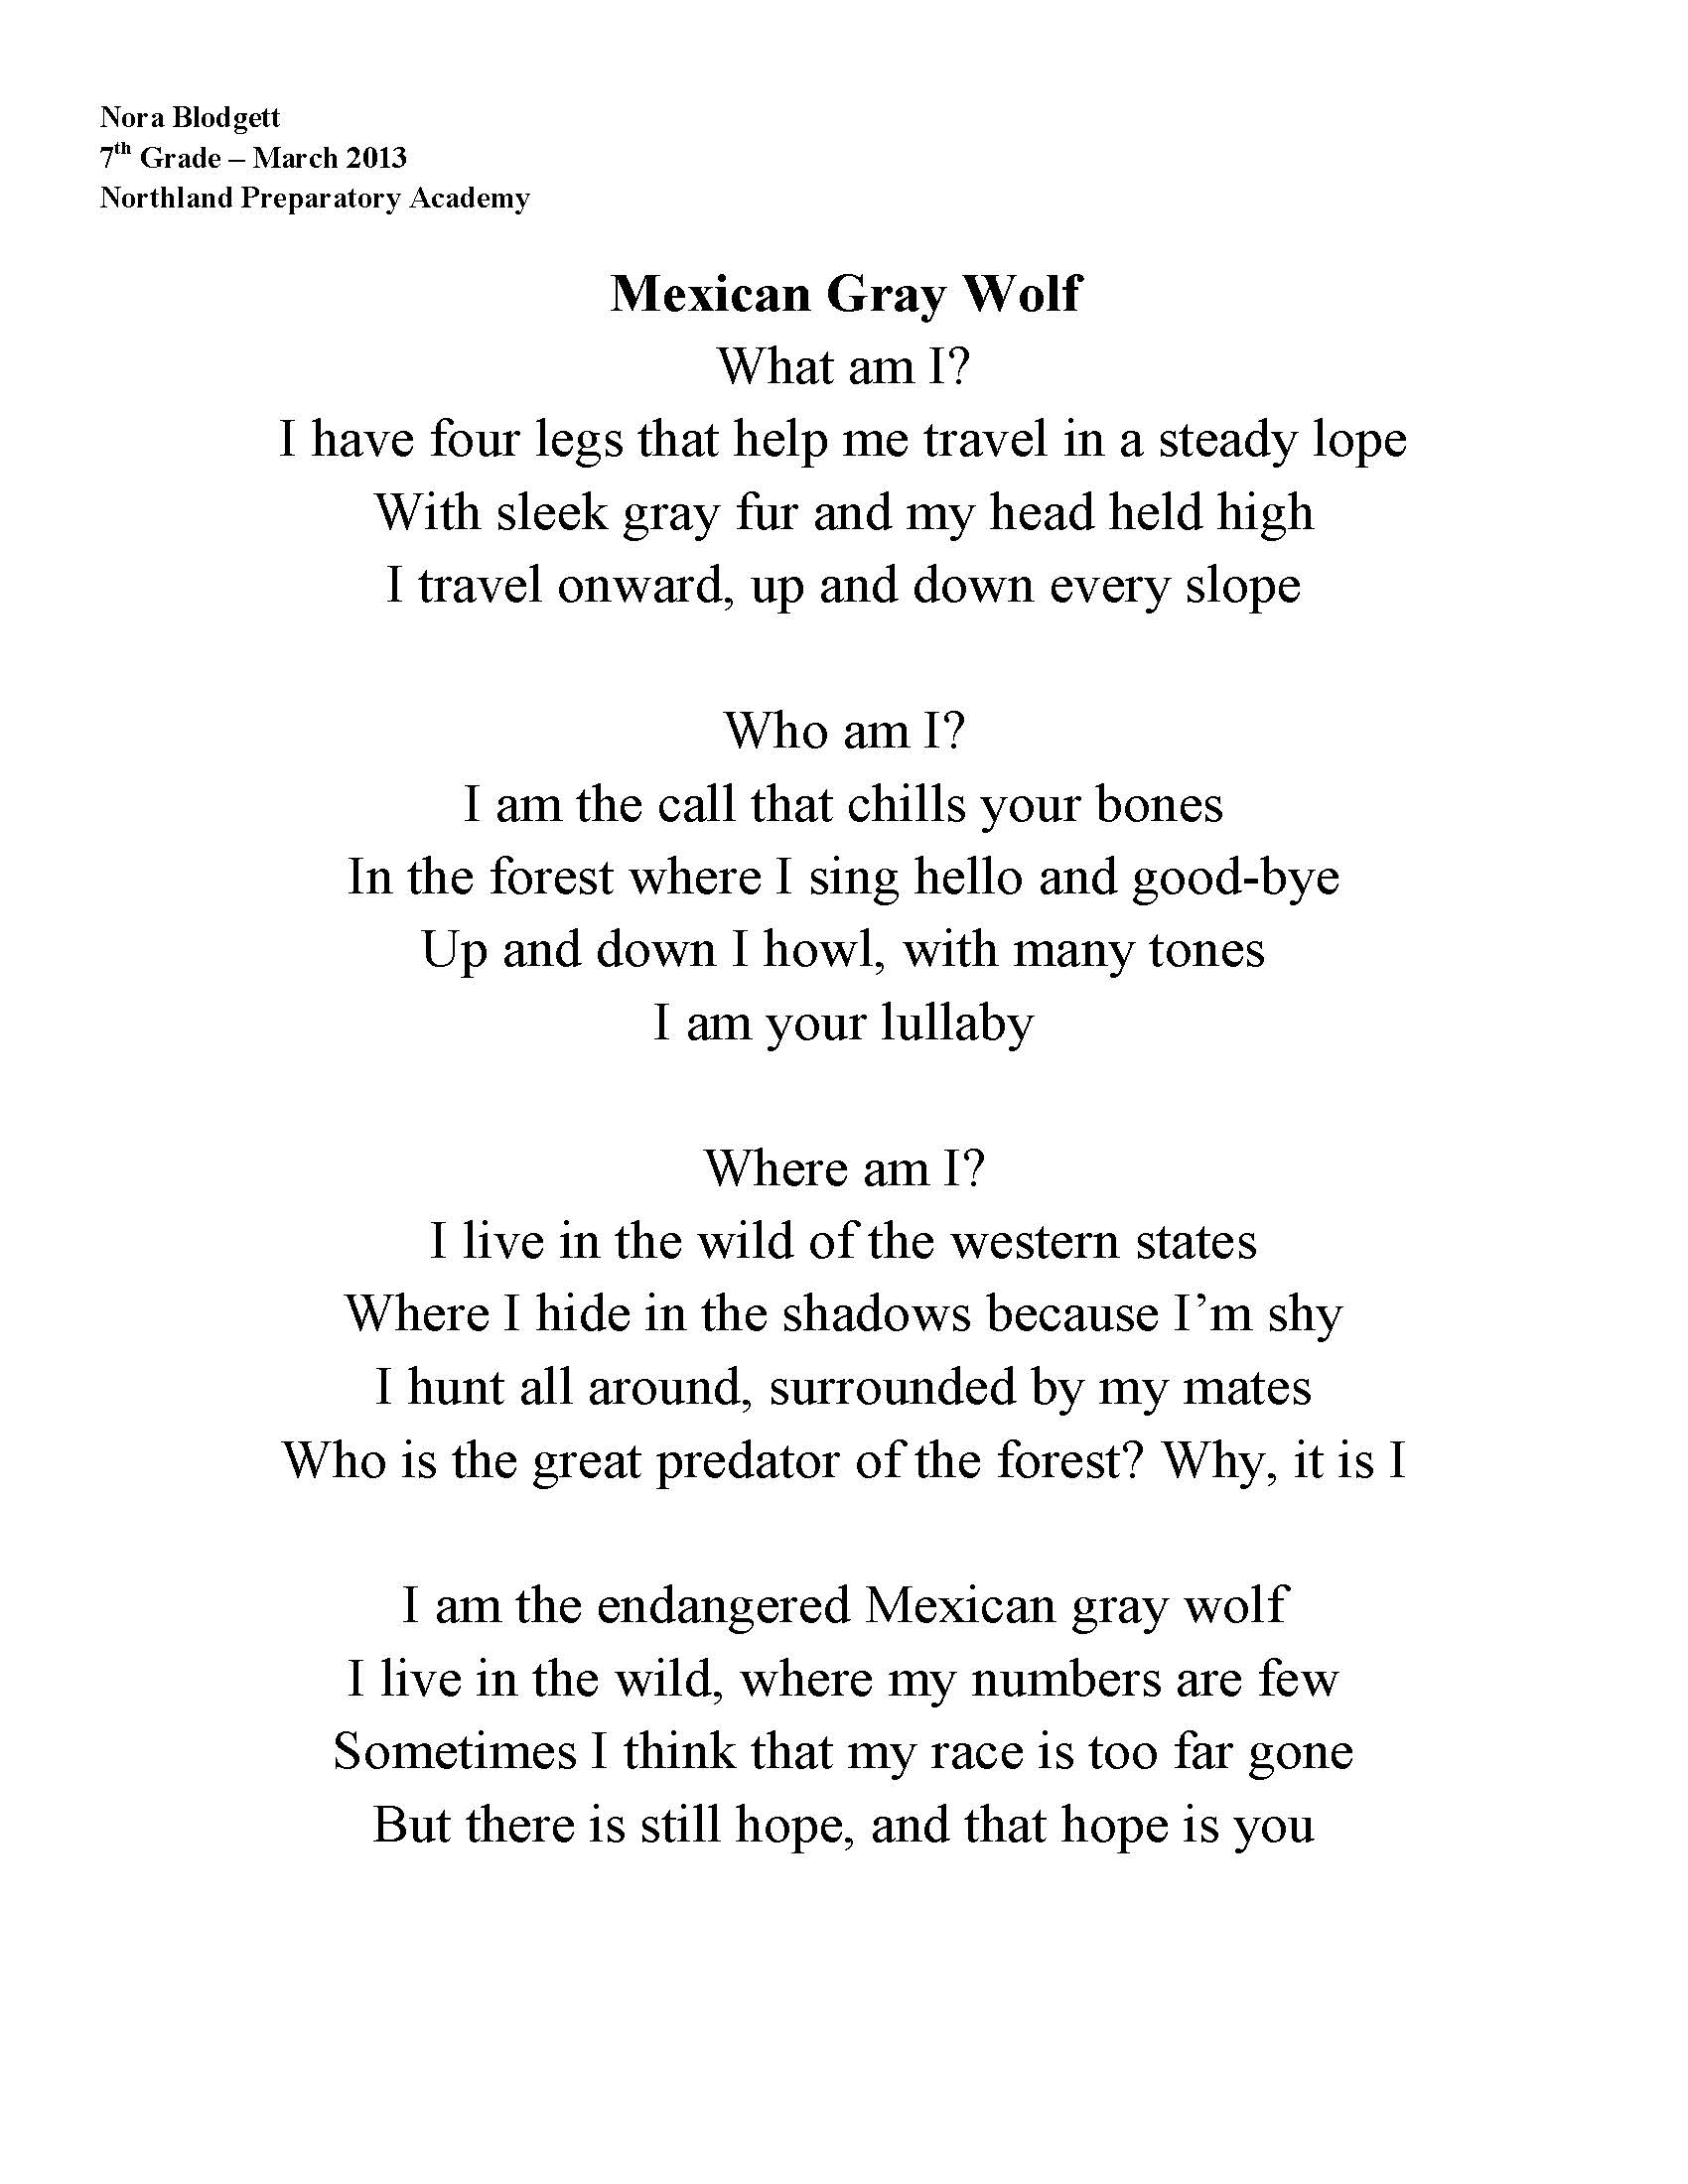 Mexican gray wolf poem by Nora Blodgett